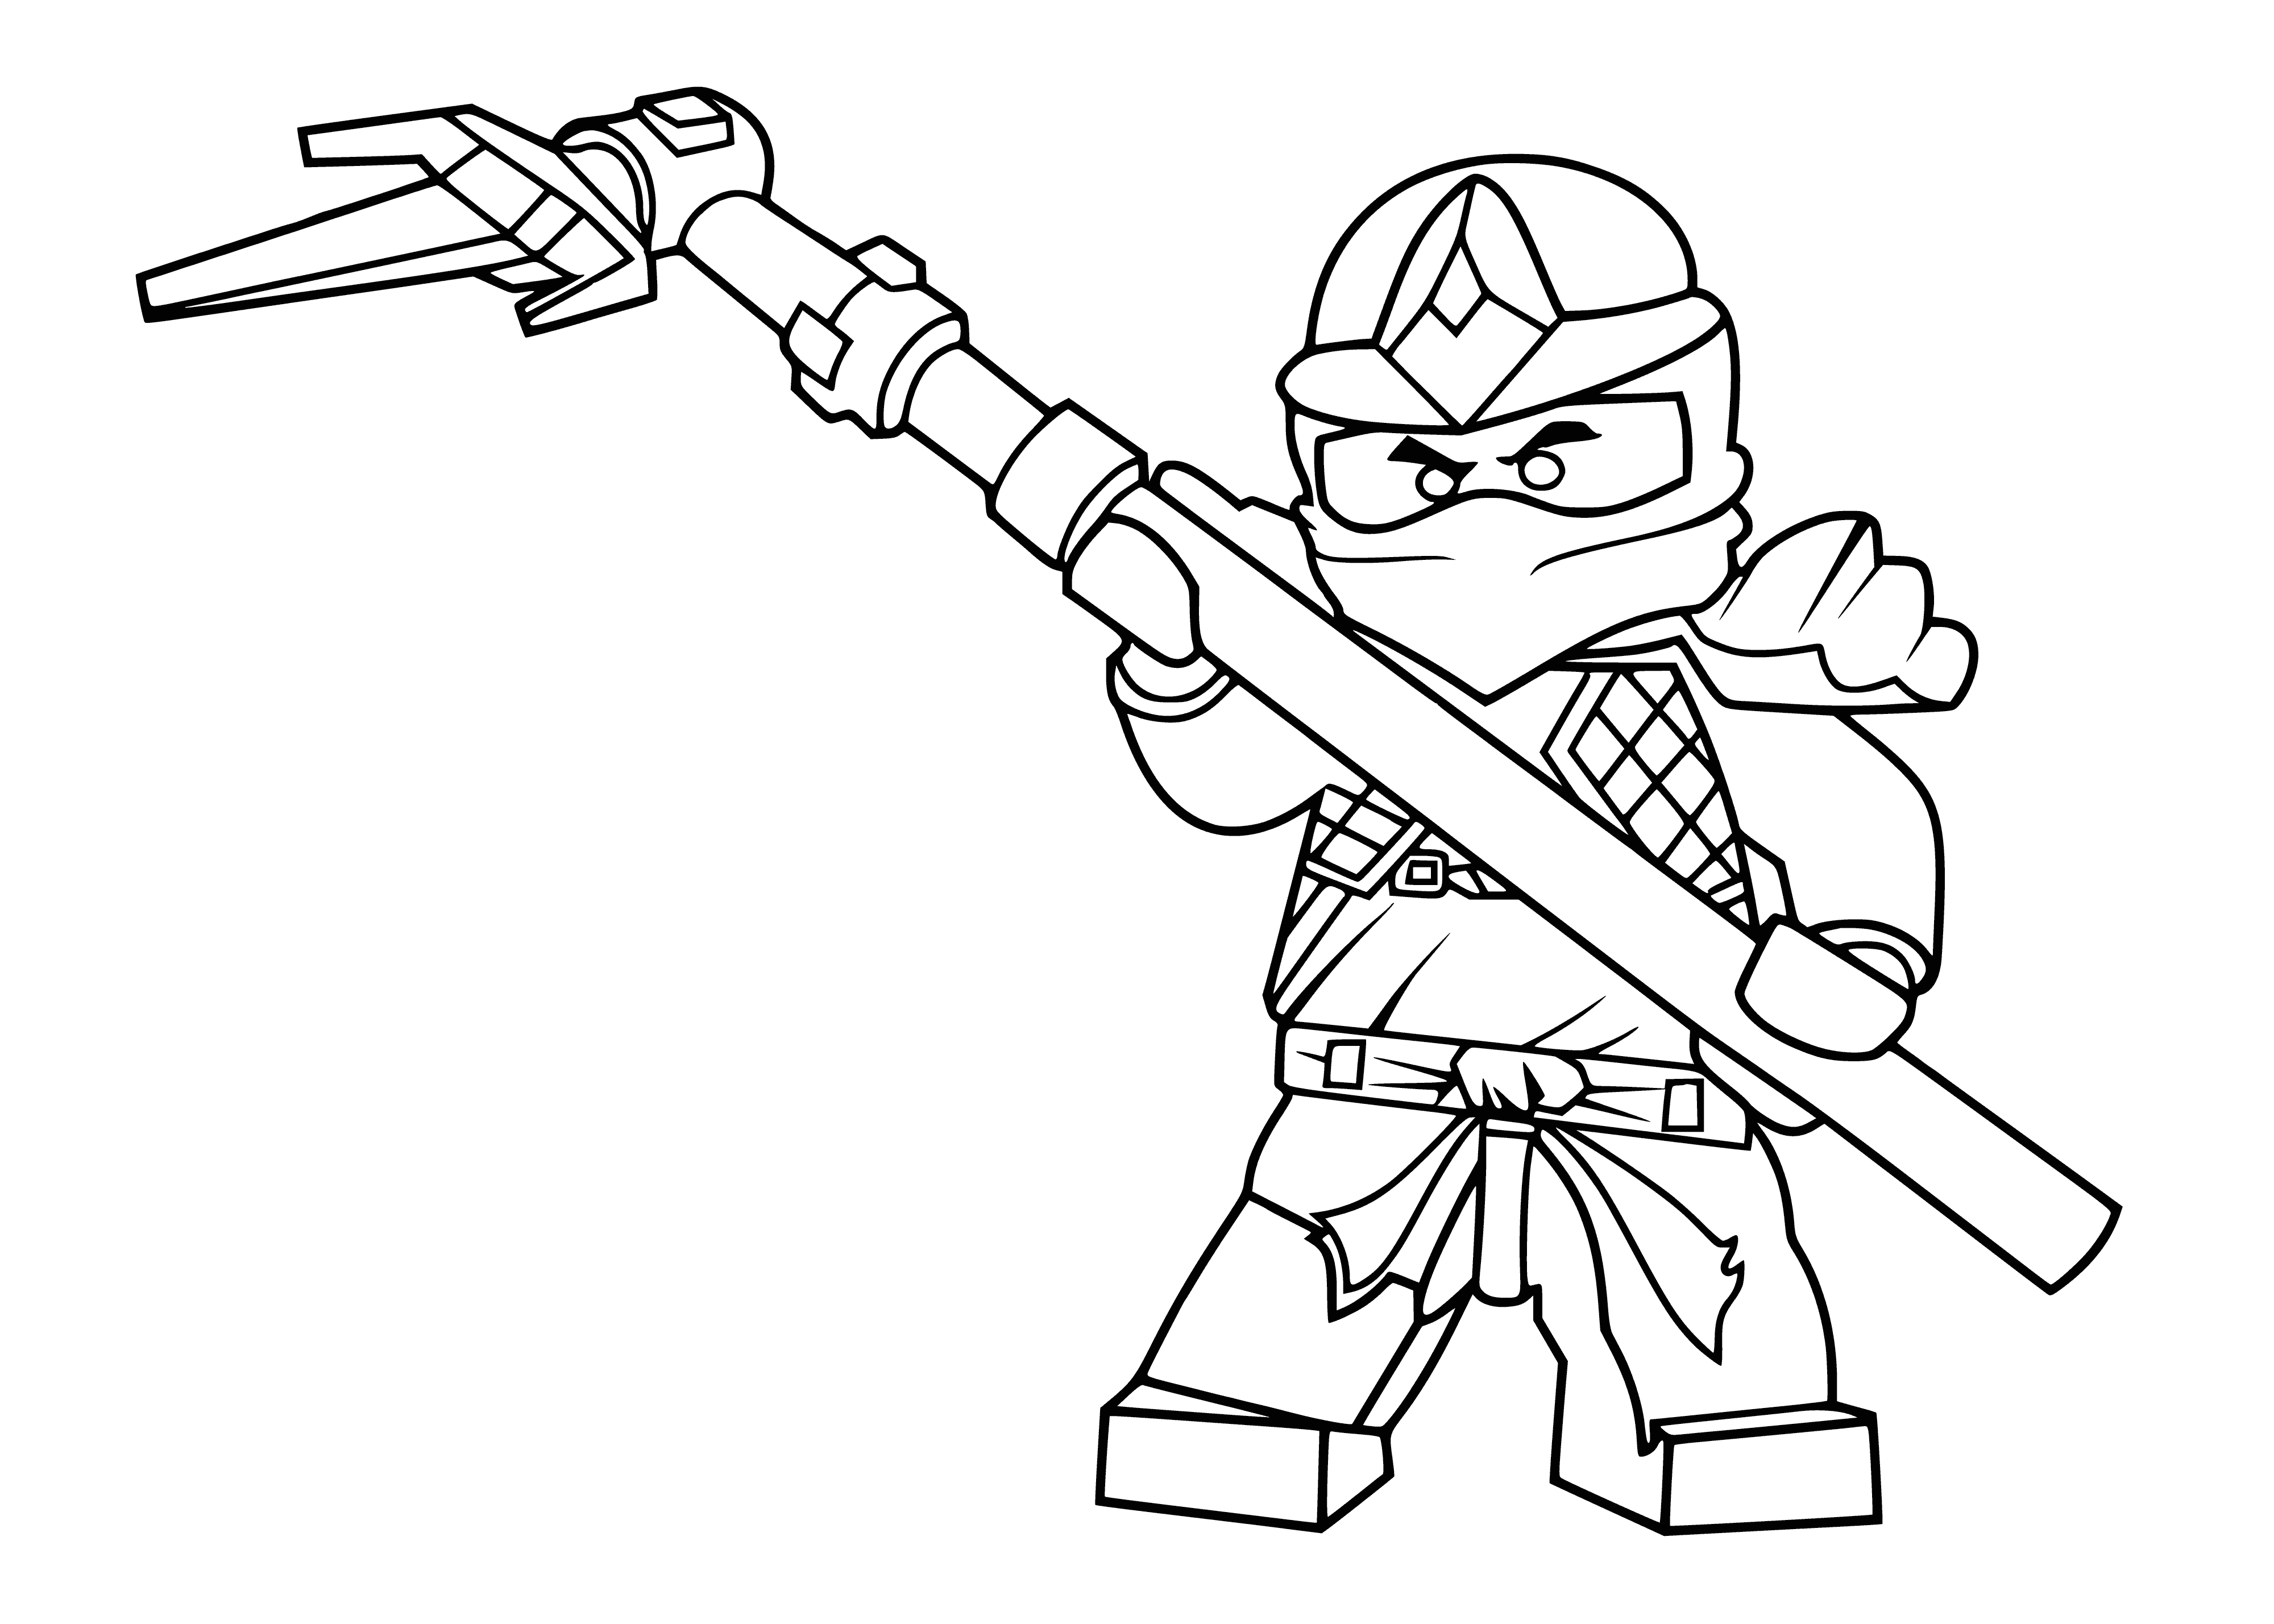 coloring page: LEGO Cole ZX battles a skeleton in this action-packed Ninjago coloring page! He's dressed all in black with a ninja mask and a silver sword. #ninjago #lego